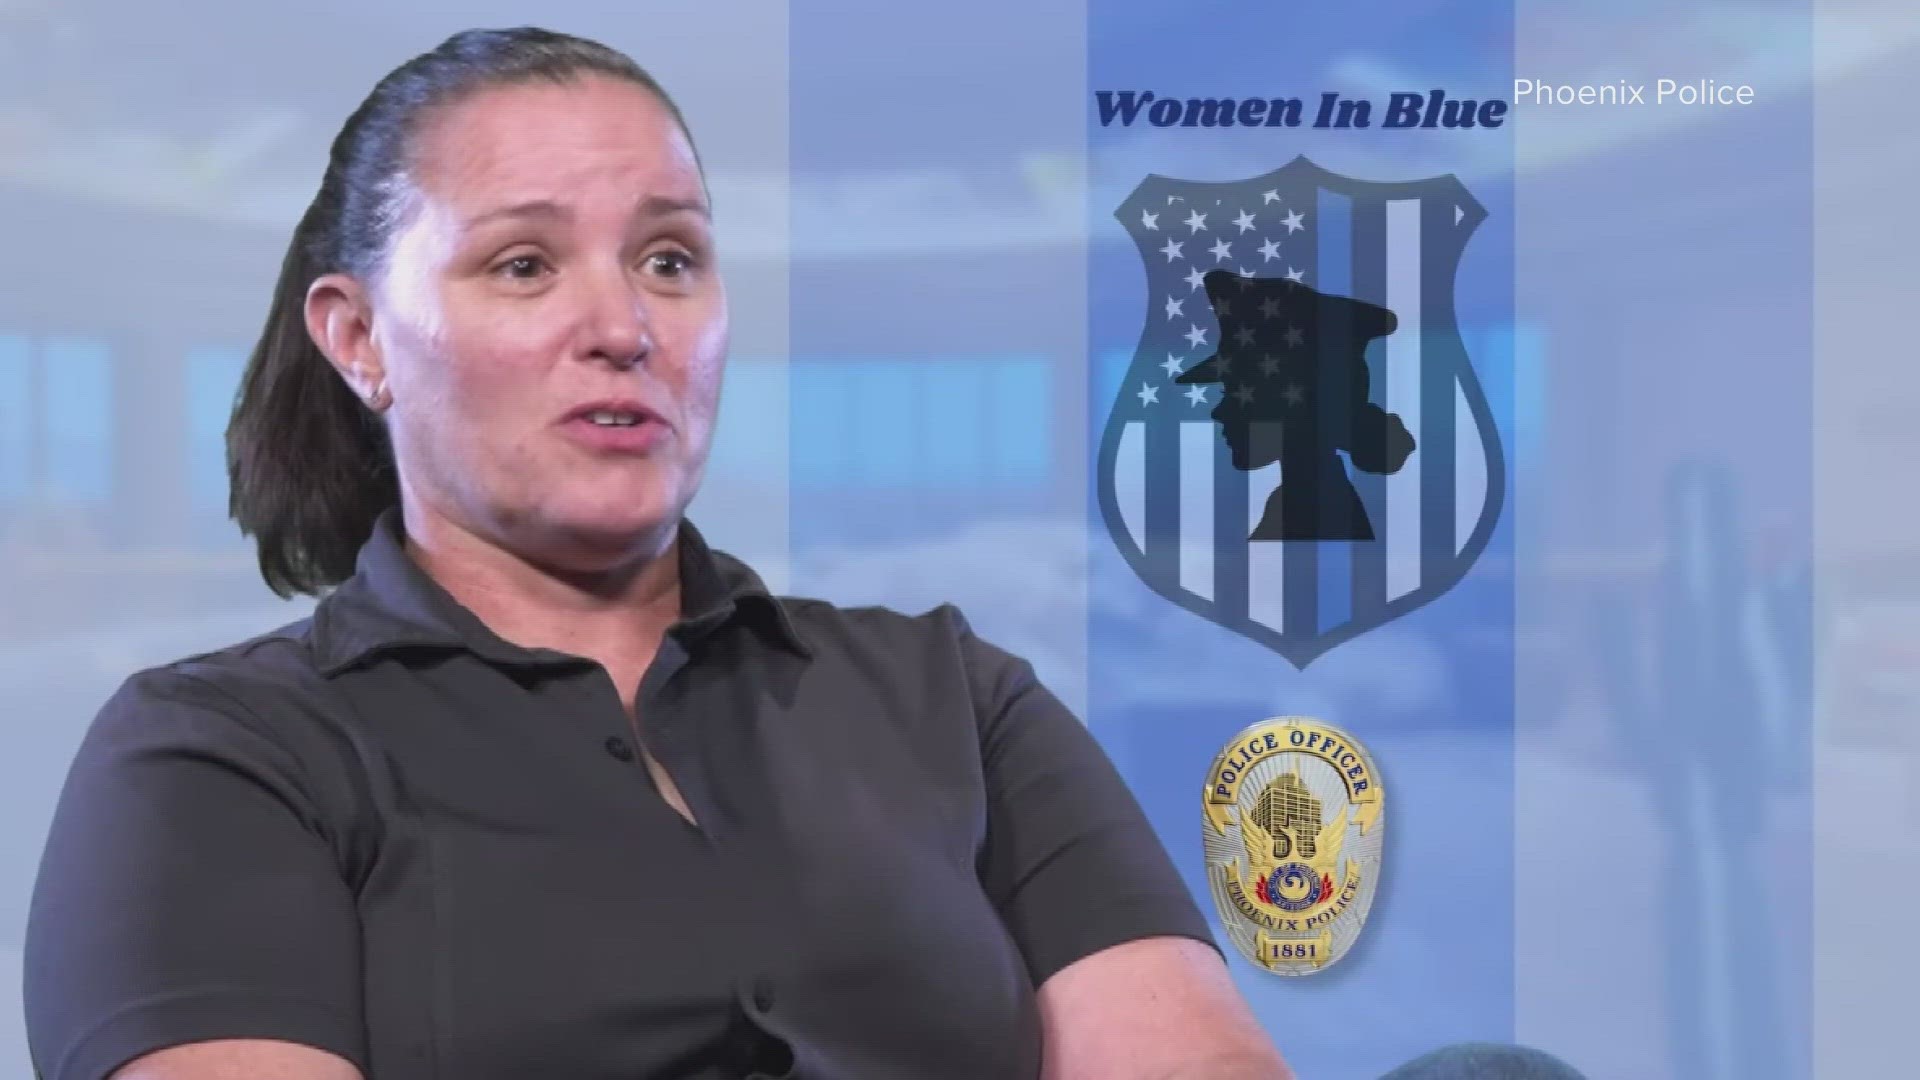 In February of 2022, a Phoenix police officer was shot multiple times in the line of duty trying to save a baby. She is still waiting to receive full benefits.